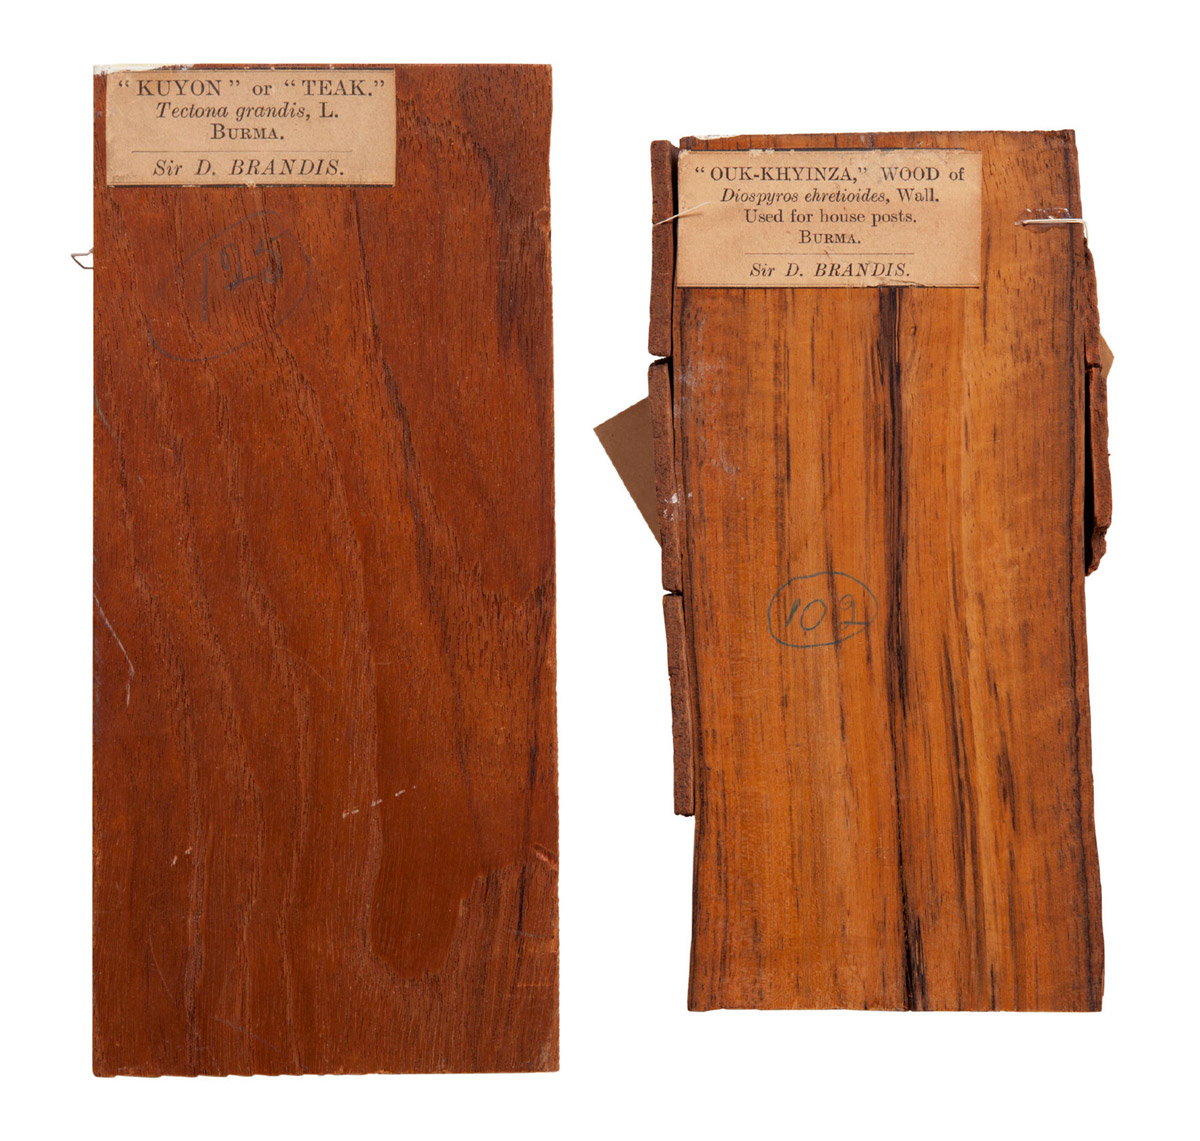 Photographs of wood samples sent by Brandis from Burma to the Kew Gardens, London.